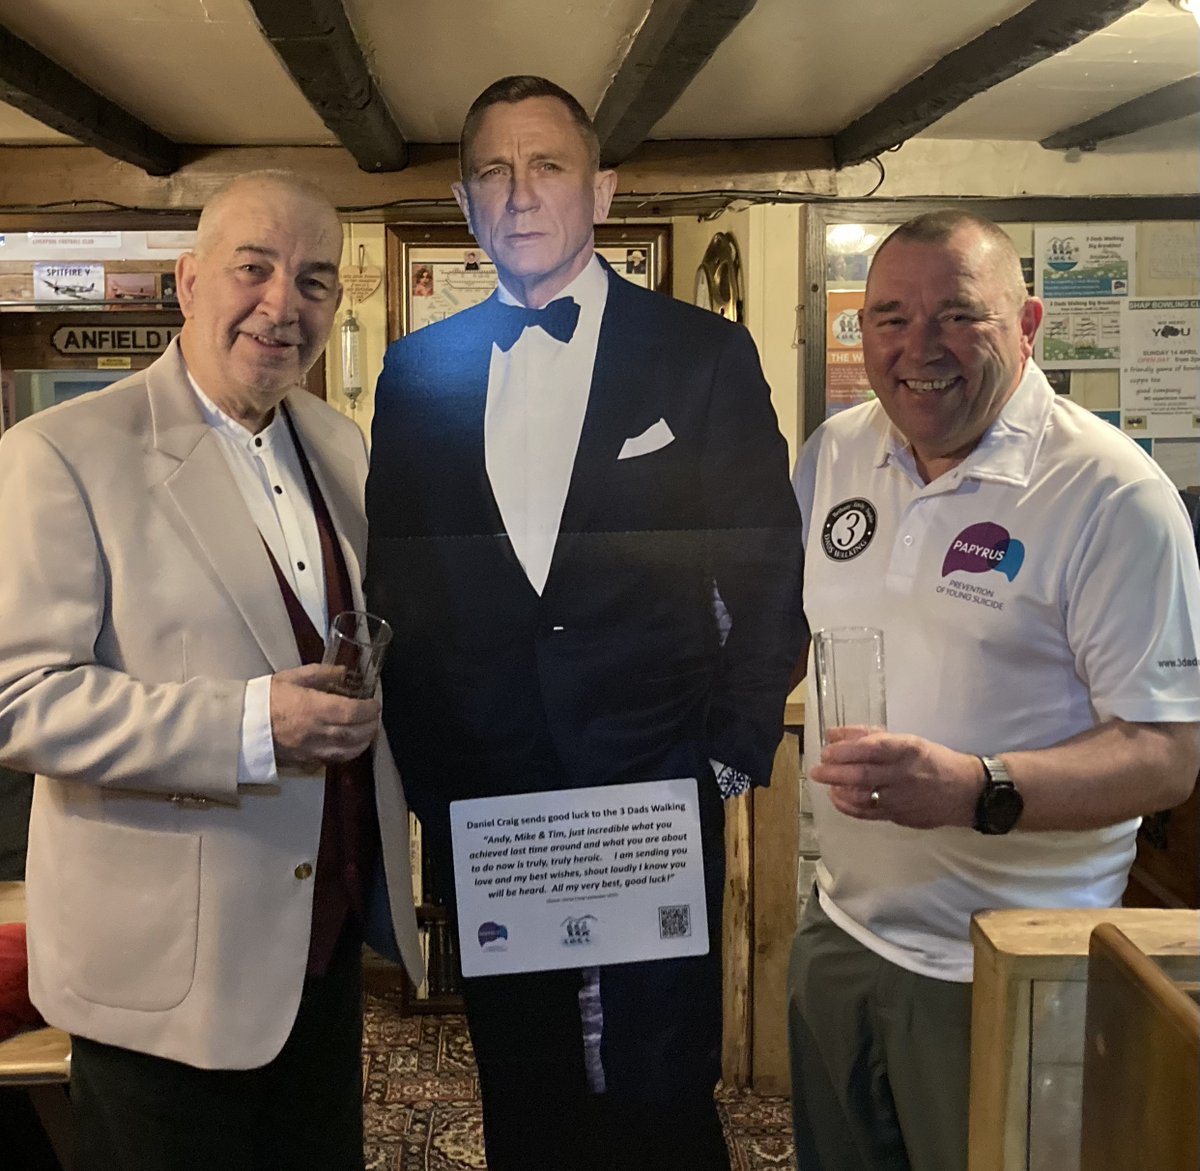 It's amazing who Andy gets to meet in the Strickland Arms (Great Strickland, Penrith) Together we can save lives @007 @PAPYRUS_Charity @Every_Life_Cumb